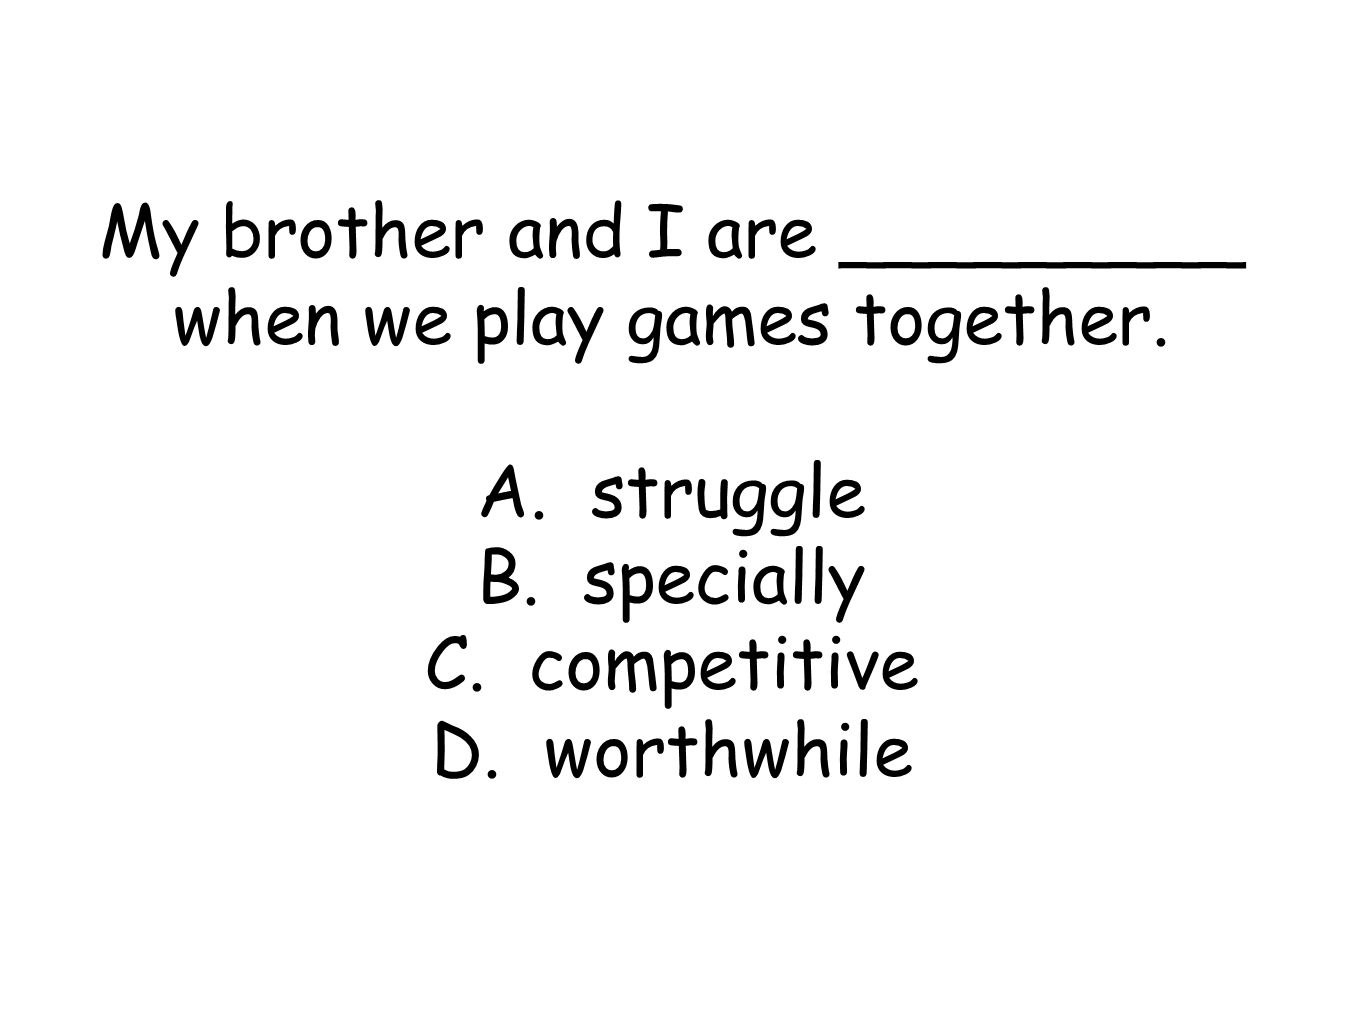 My brother and I are _________ when we play games together.